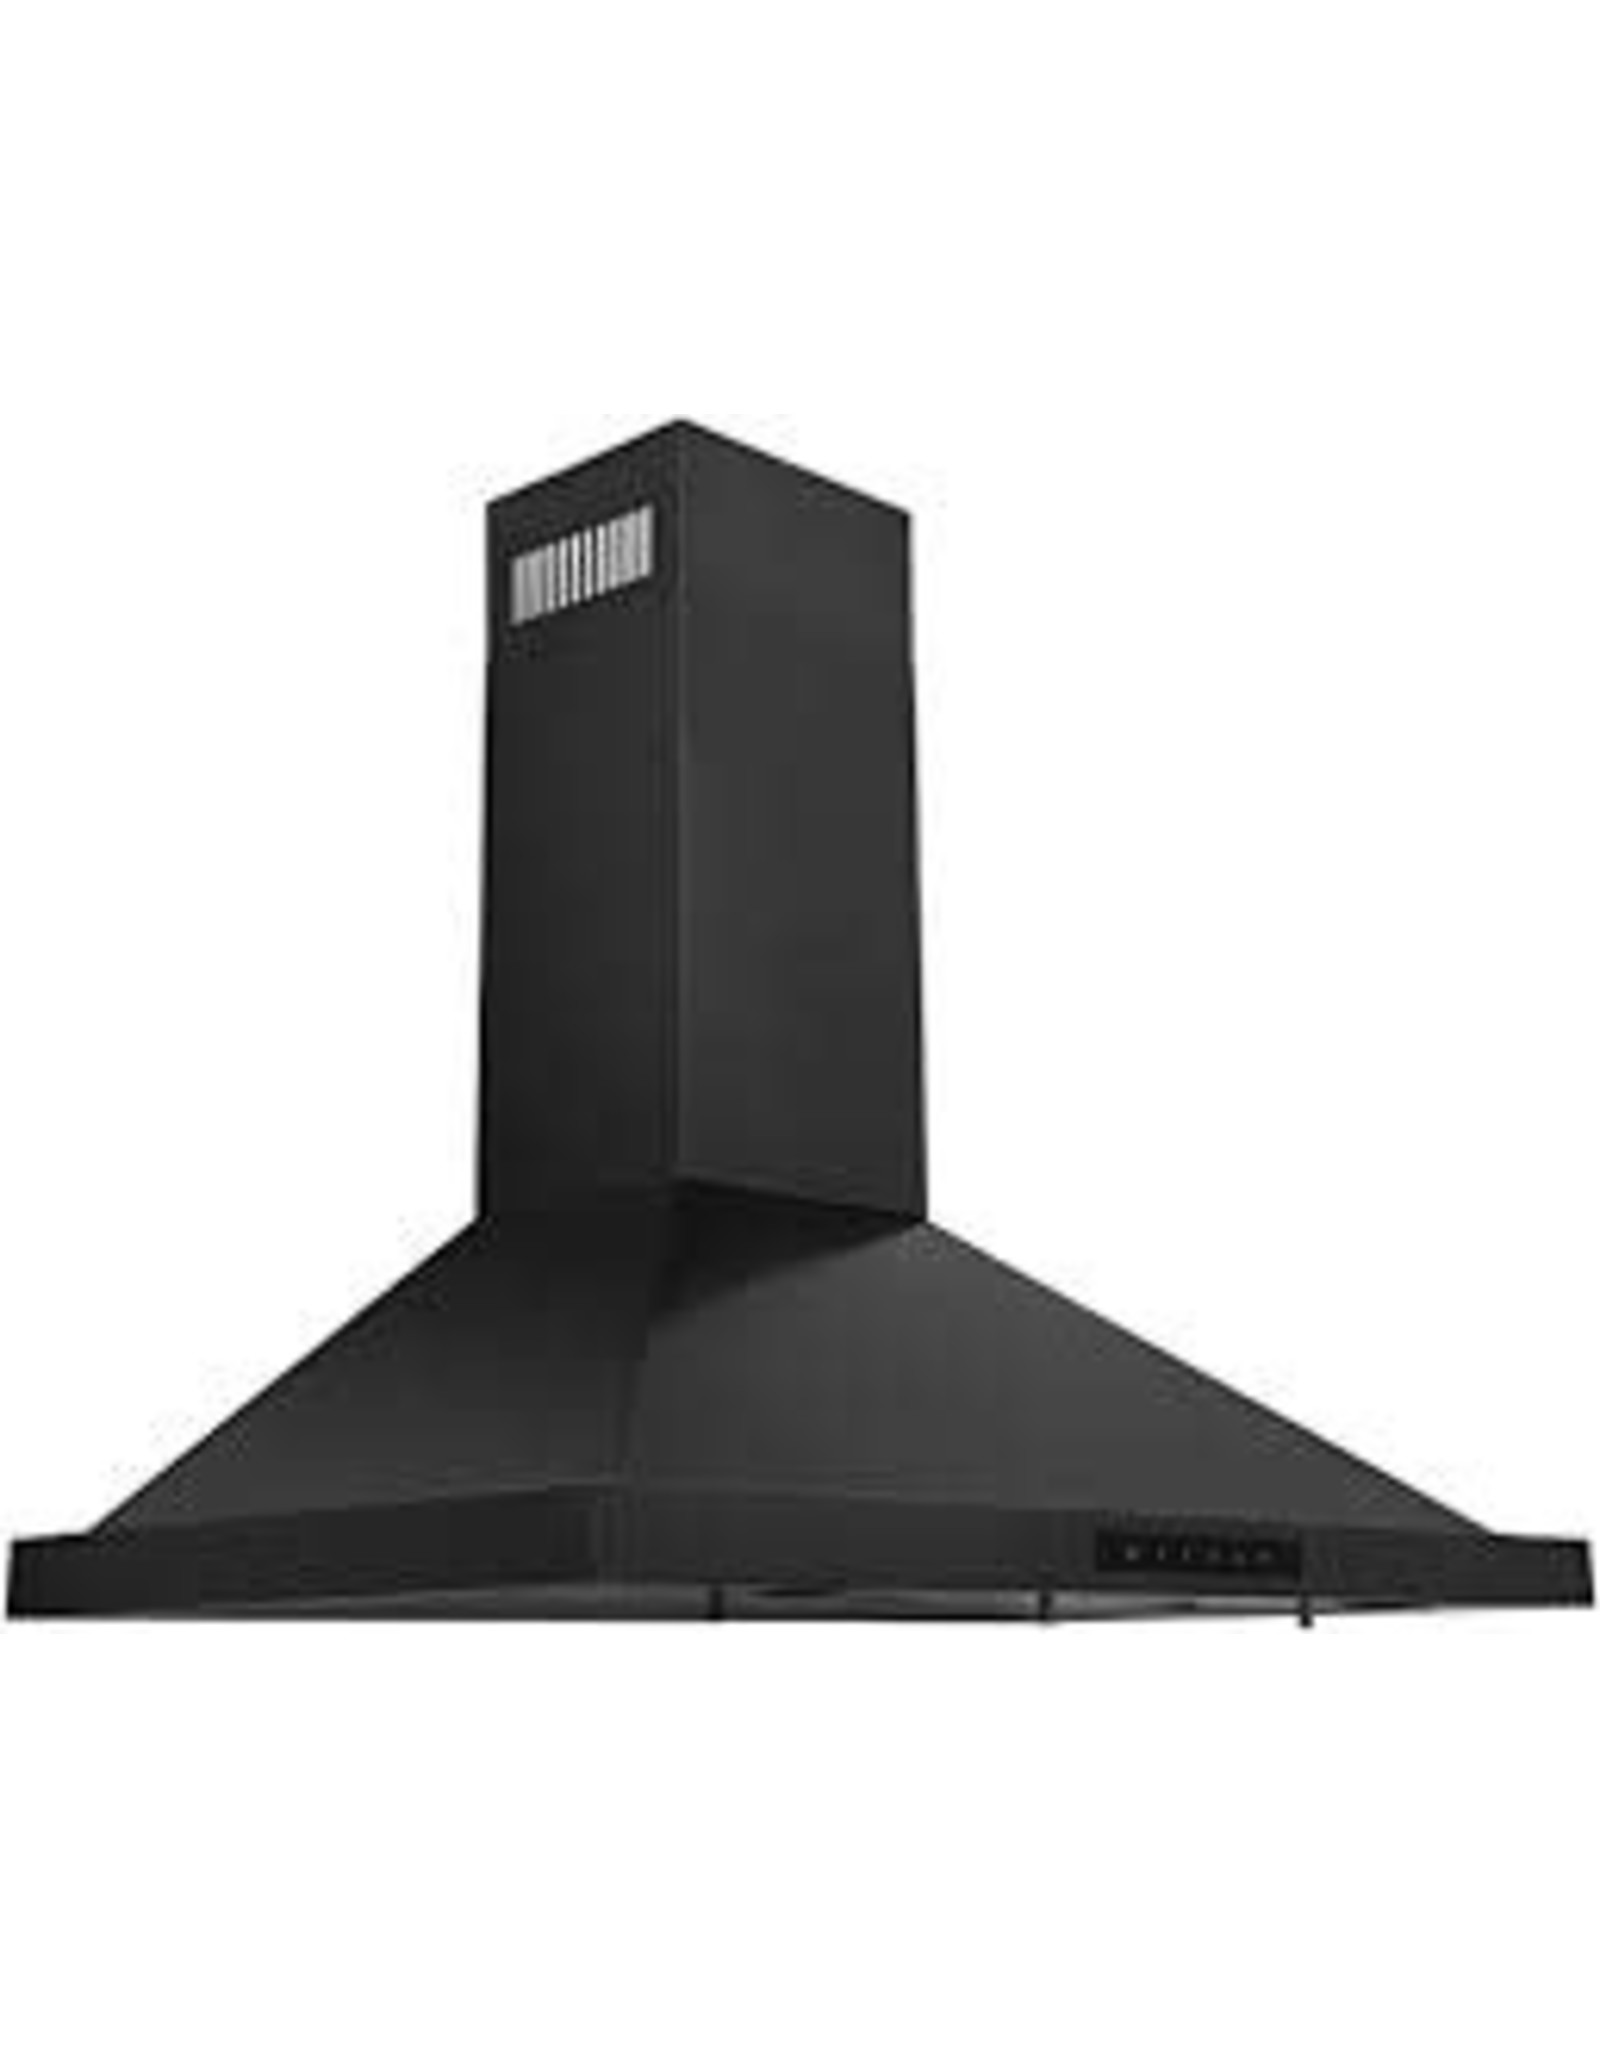 KB-36-S32 ZLINE Convertible Vent Wall Mount Range Hood in Black Stainless Steel with Crown Molding (BSKBNCRN)